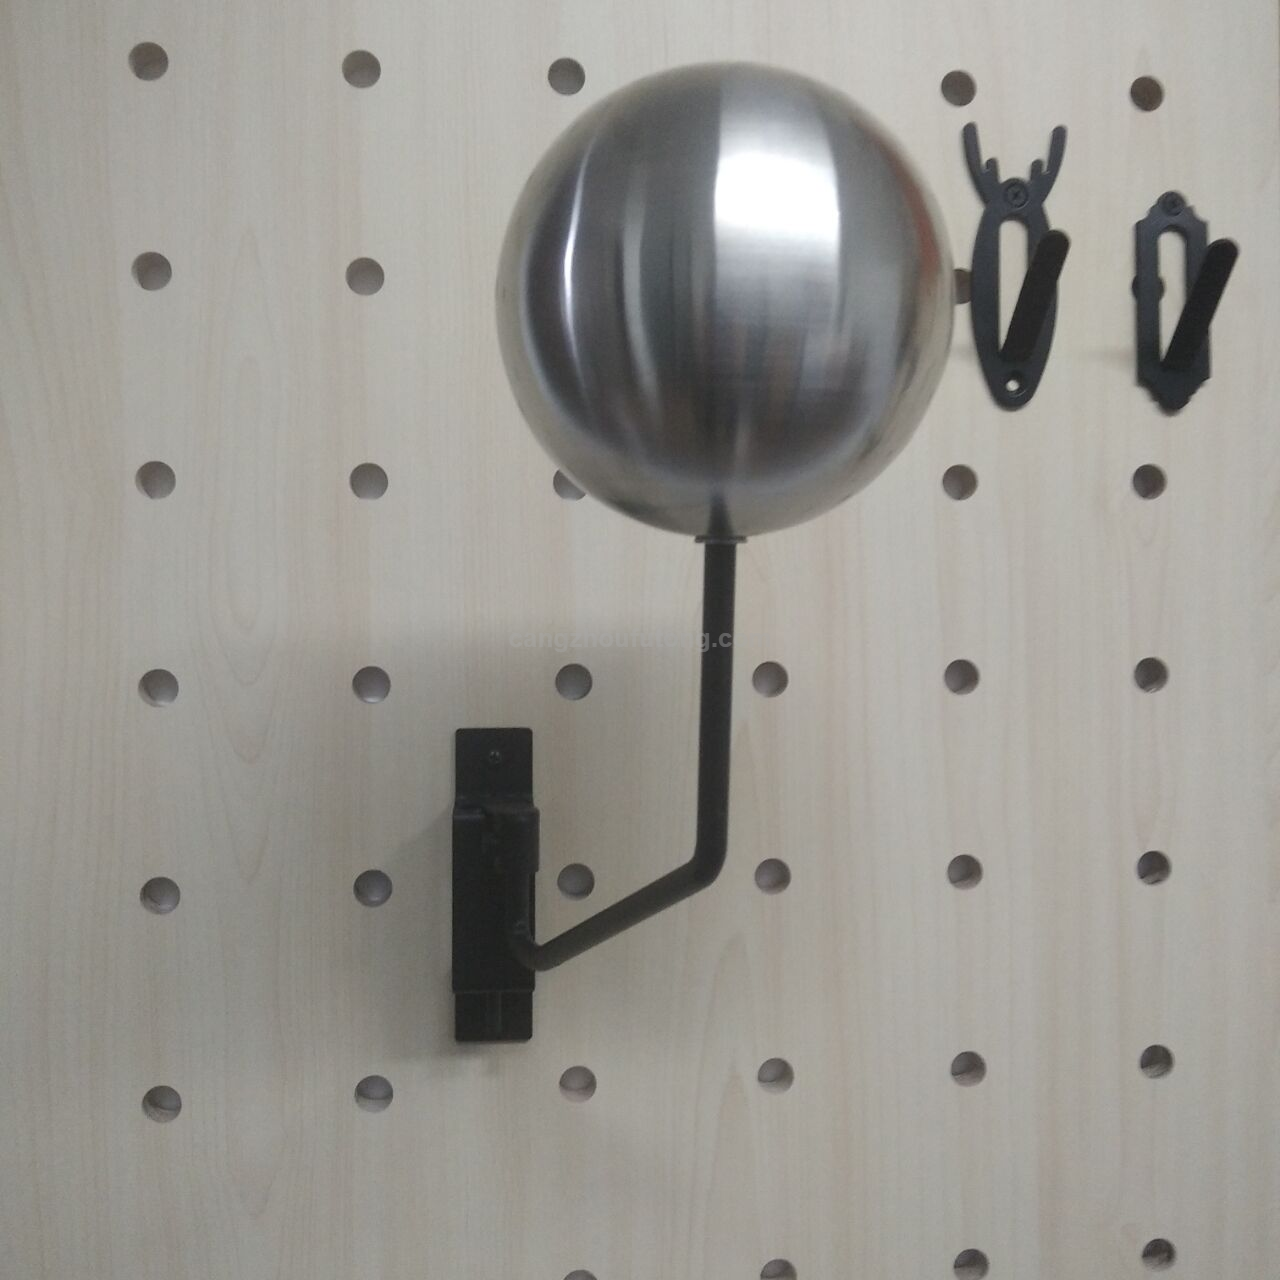 Wall Mounted Motorcycle Helmet Holder And Jacket Holder